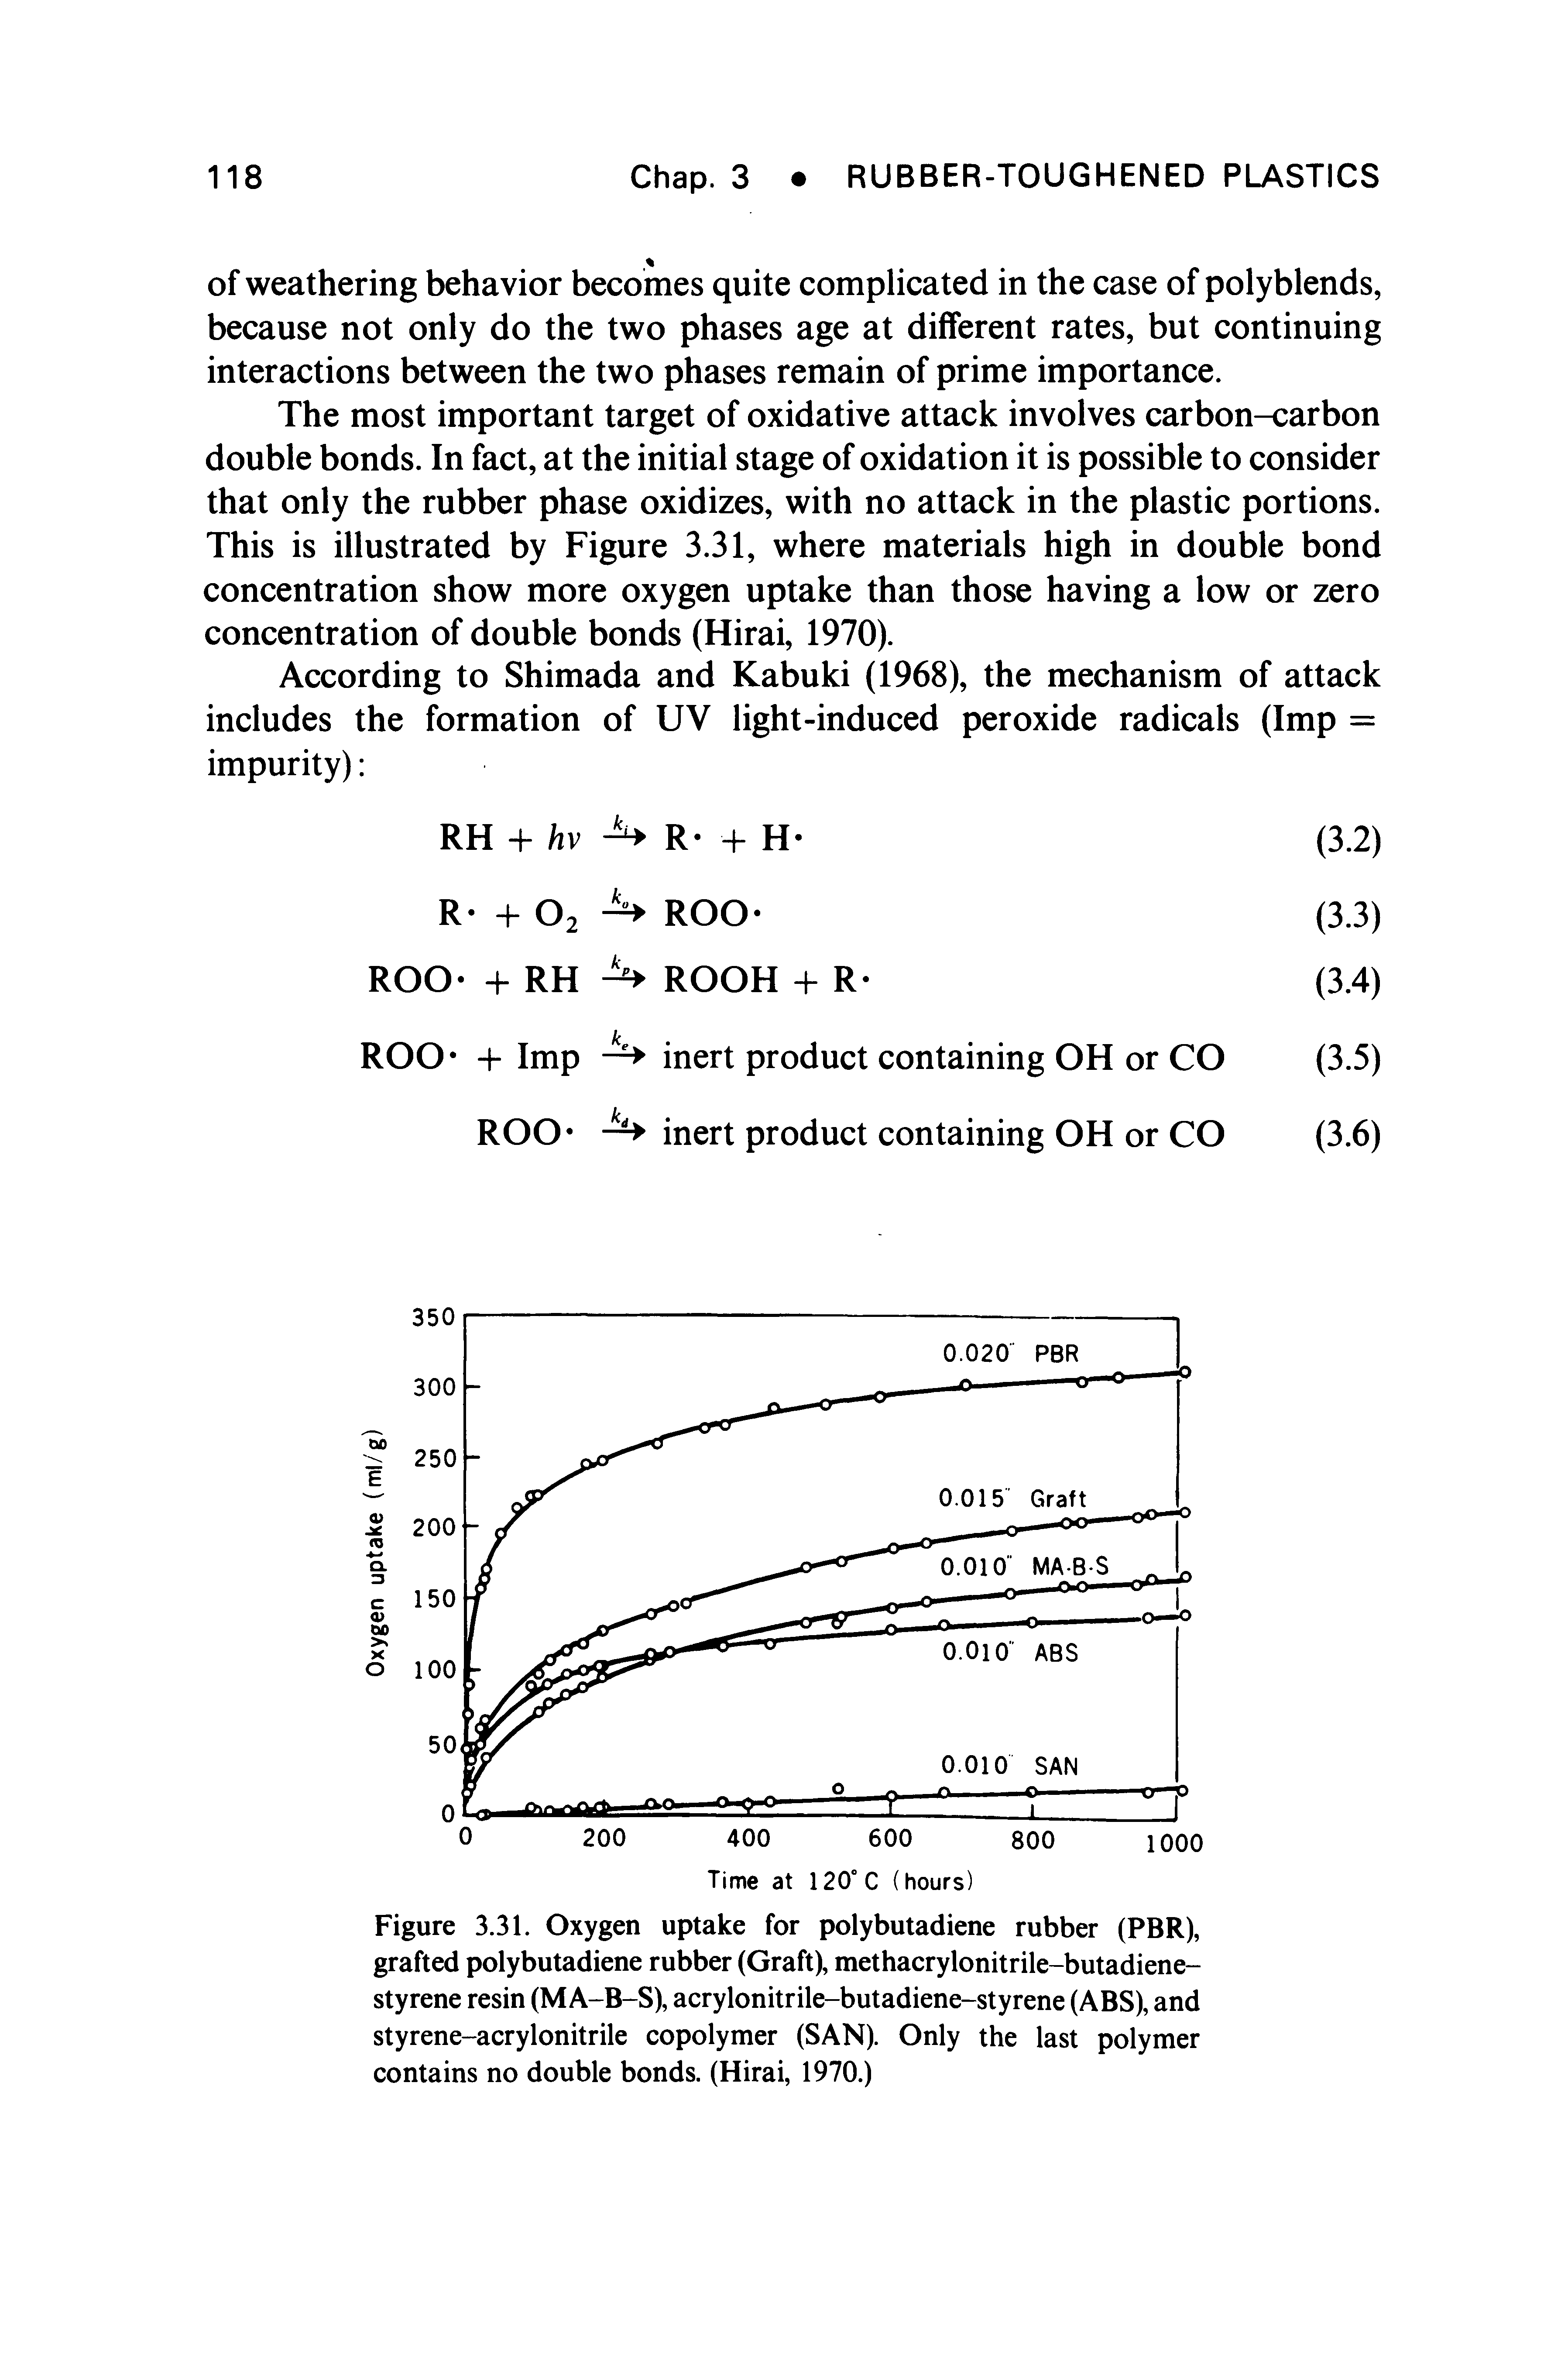 Figure 3.31. Oxygen uptake for polybutadiene rubber (PBR), grafted polybutadiene rubber (Graft), methacrylonitrile-butadiene-styrene resin (M A-B-S), acrylonitrile-butadiene-styrene (ABS), and styrene-acrylonitrile copolymer (SAN). Only the last polymer contains no double bonds. (Hirai, 1970.)...